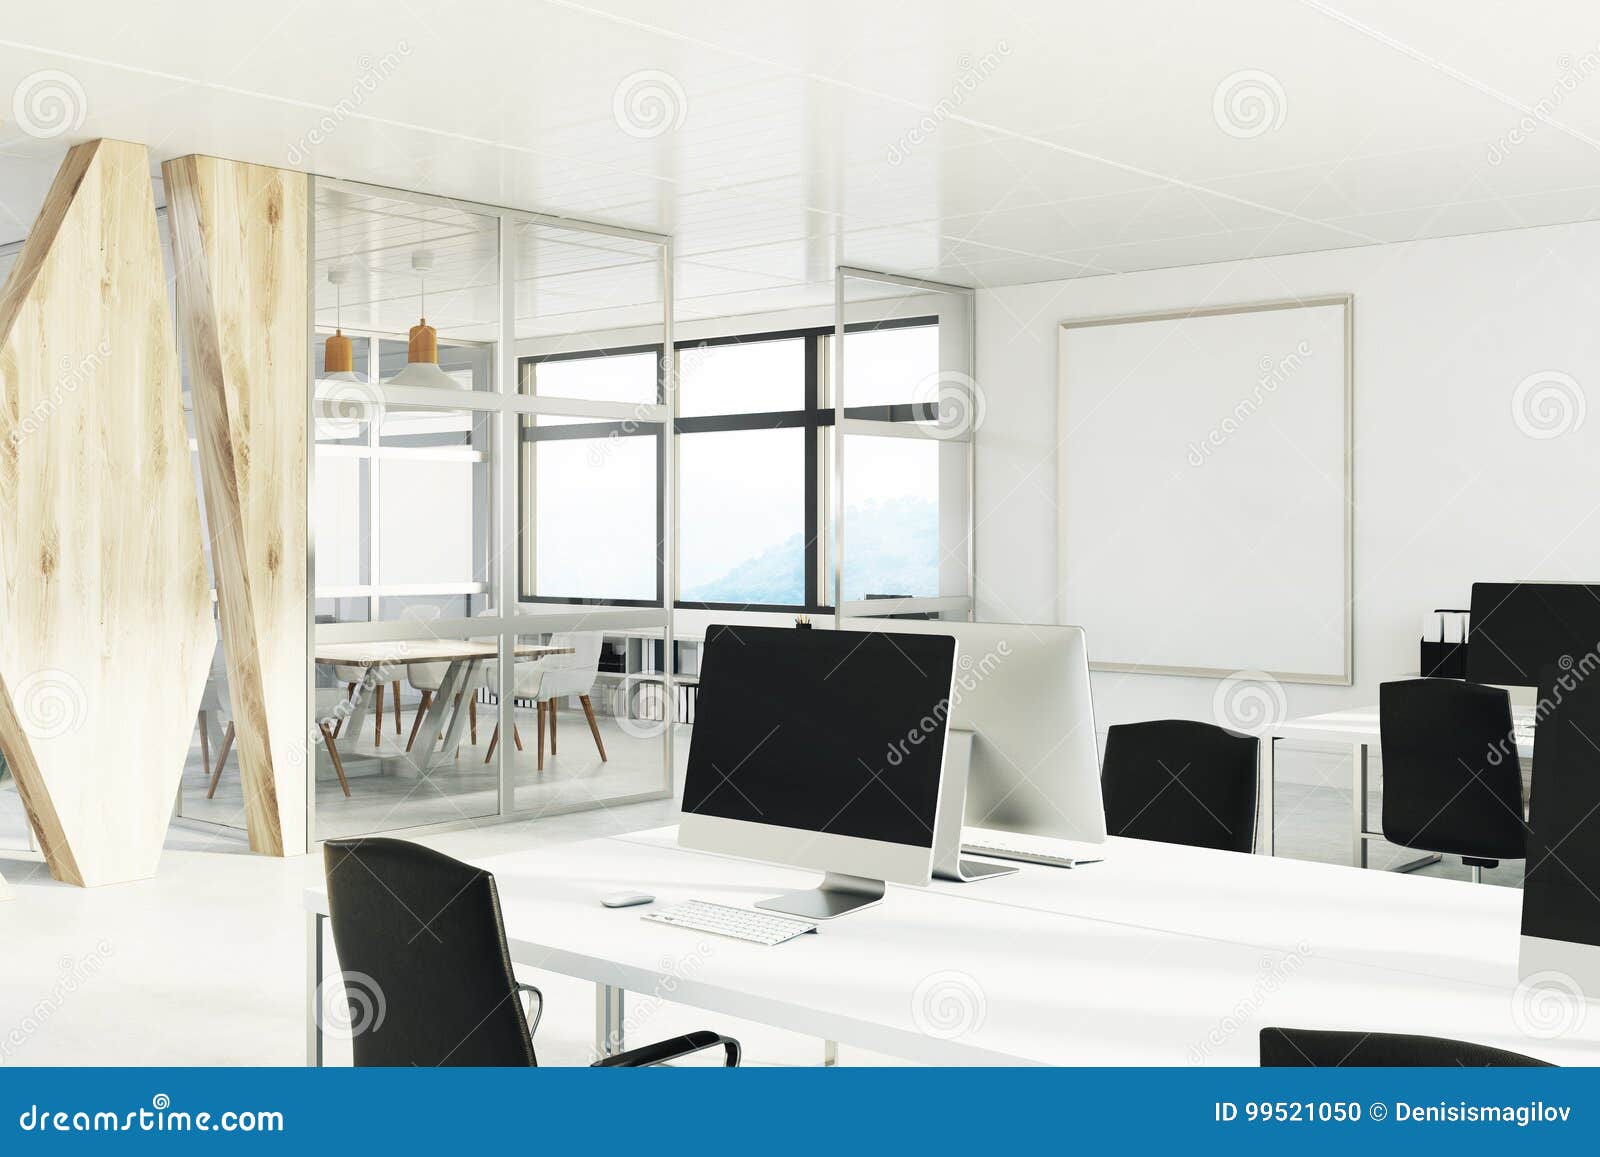 Open Space Office With A Wooden Wall Corner Stock